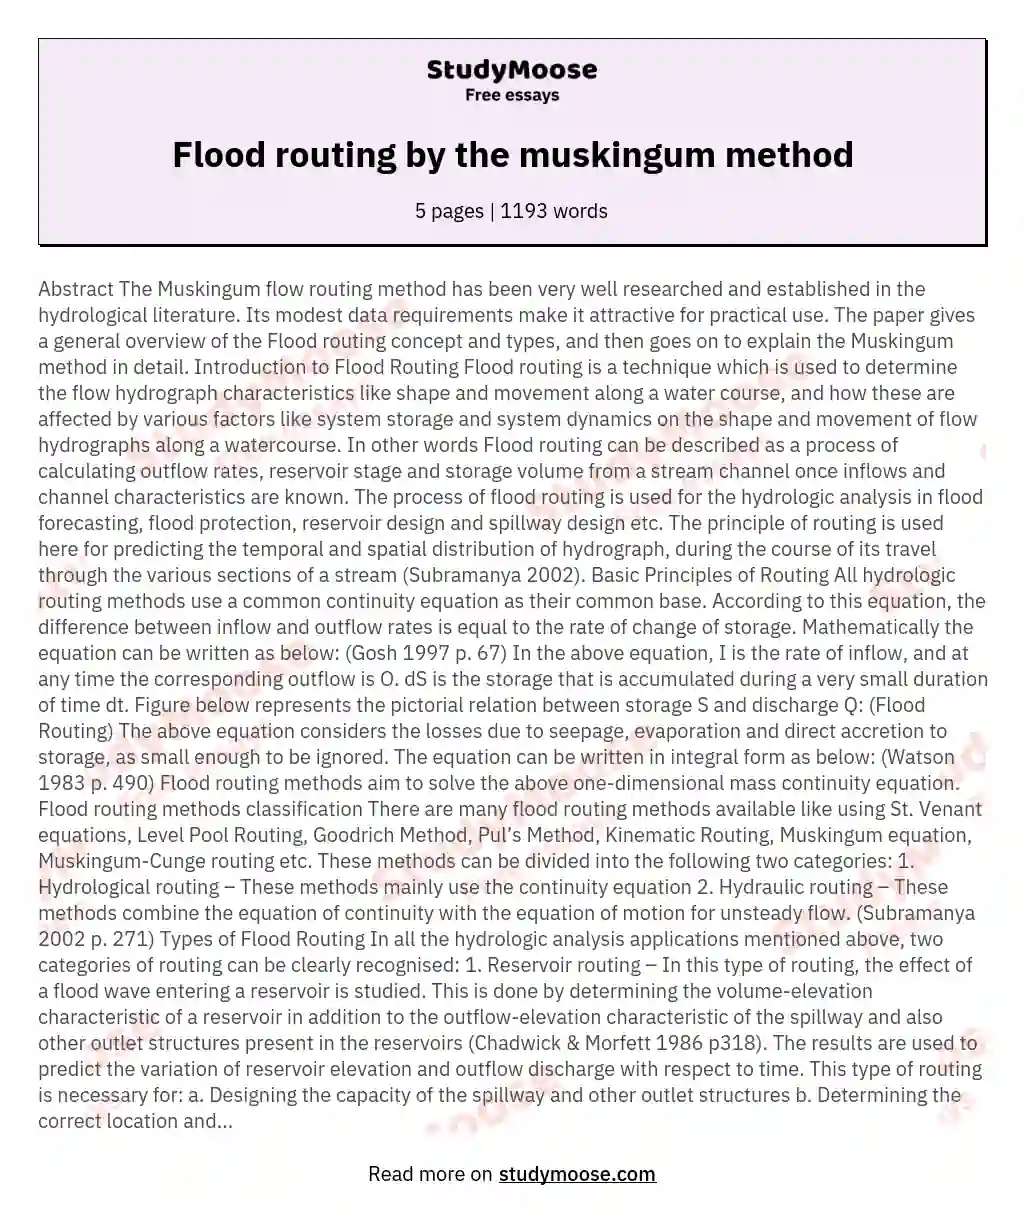 Flood routing by the muskingum method essay